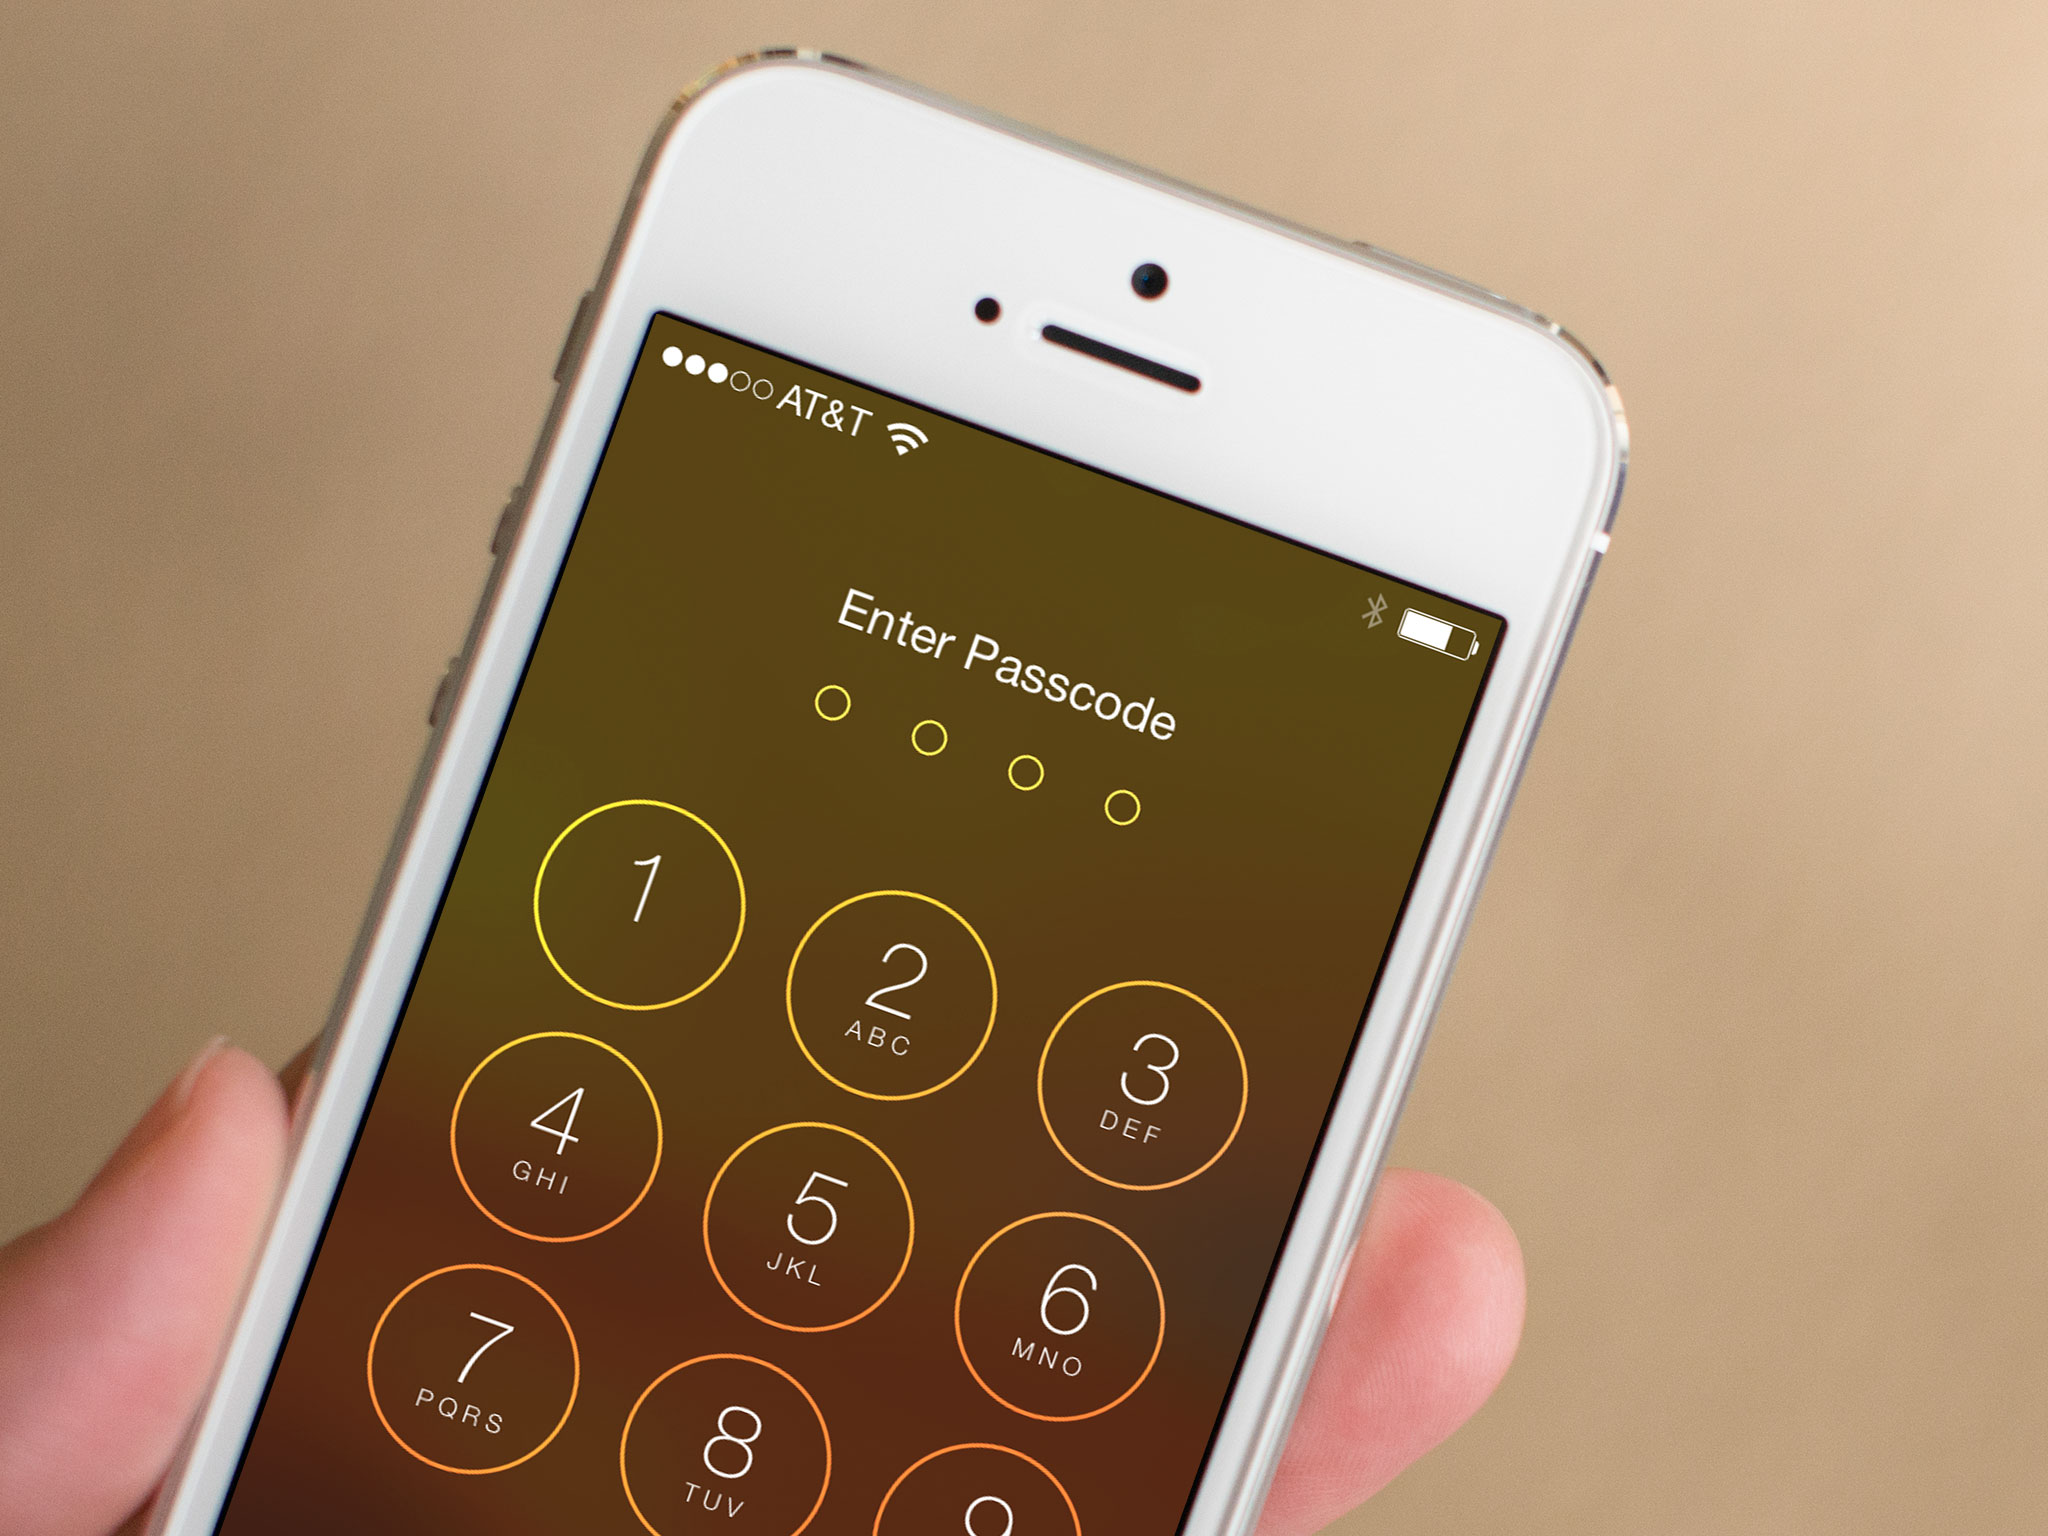 Secure your iPhone or iPad with a 4-digit passcode